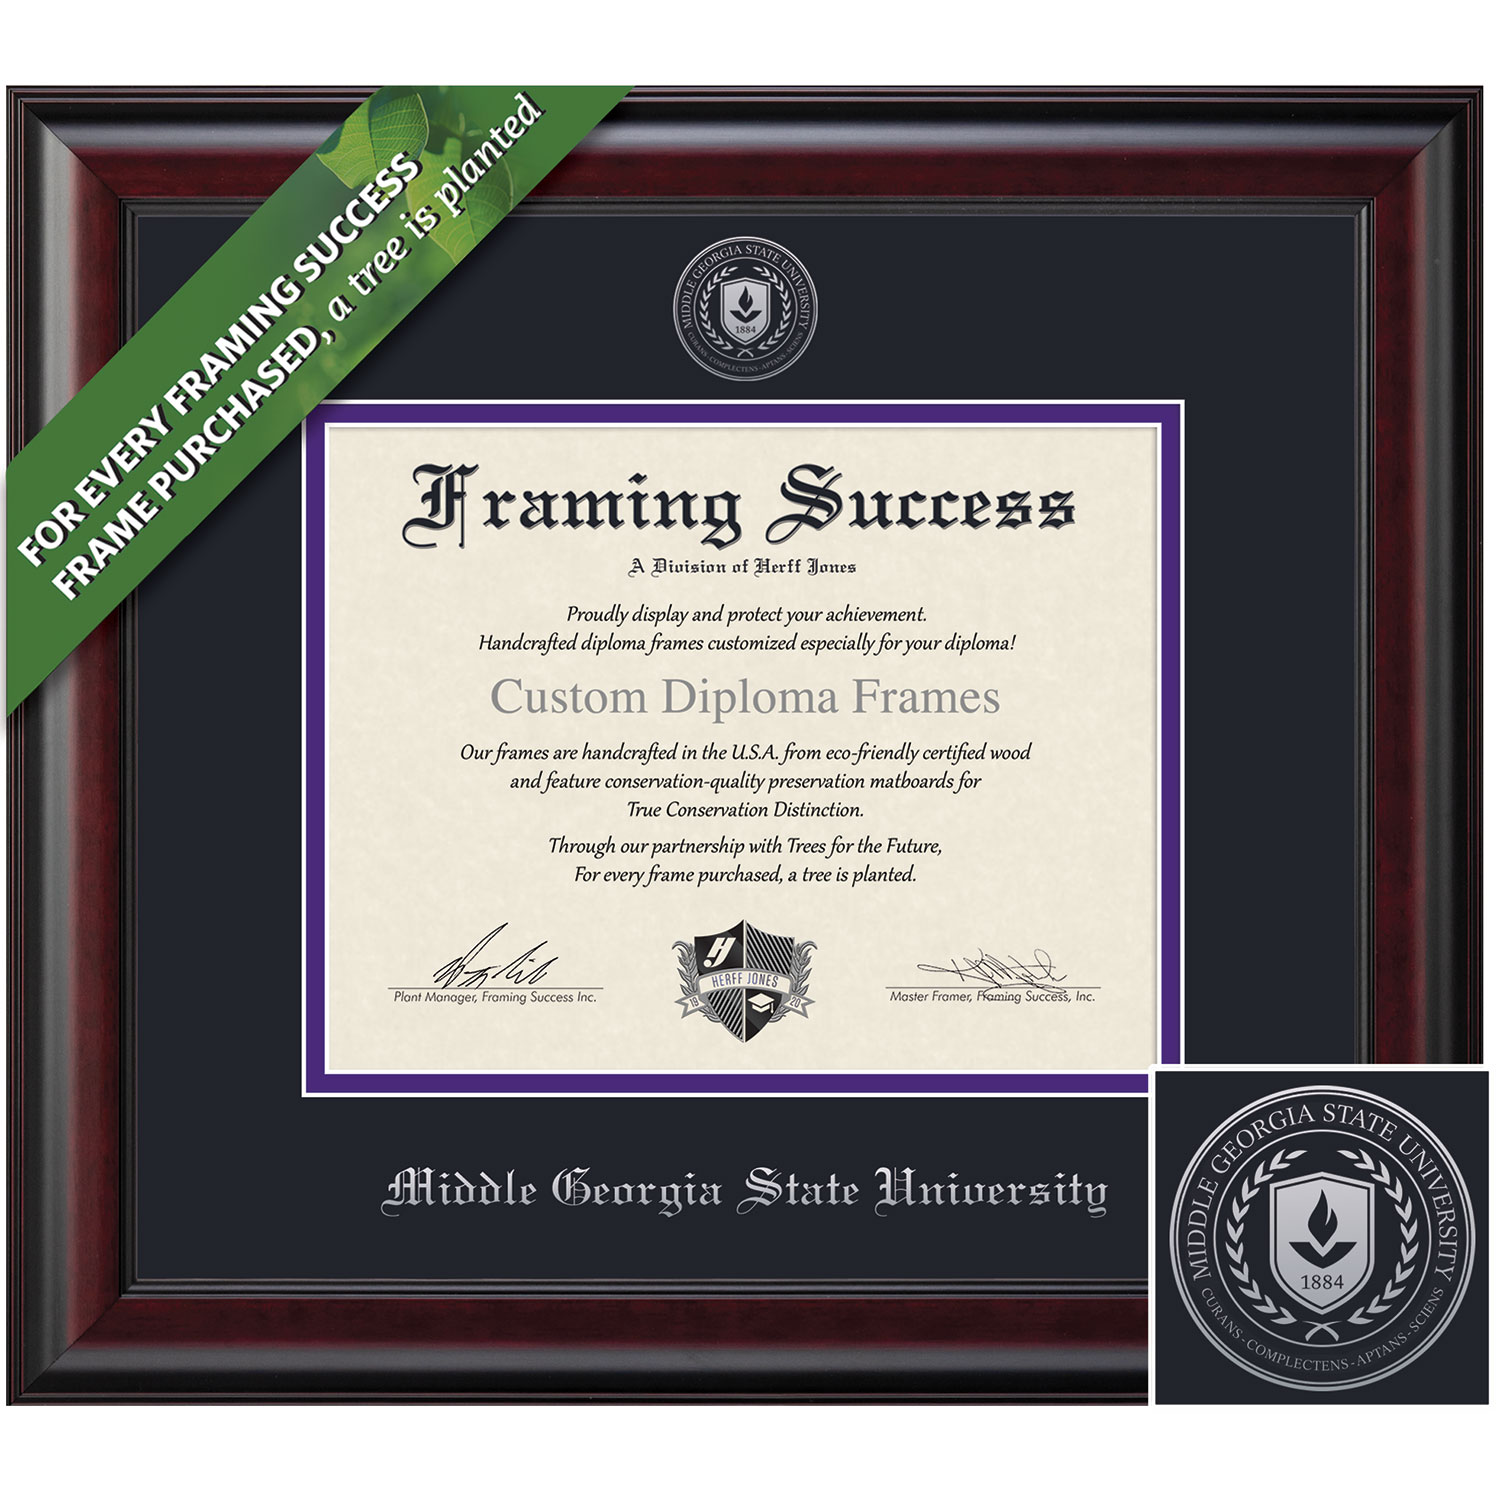 Framing Success 8 1/2 x 11 Classic Silver Embossed School Seal Associates, Bachelors Diploma Frame